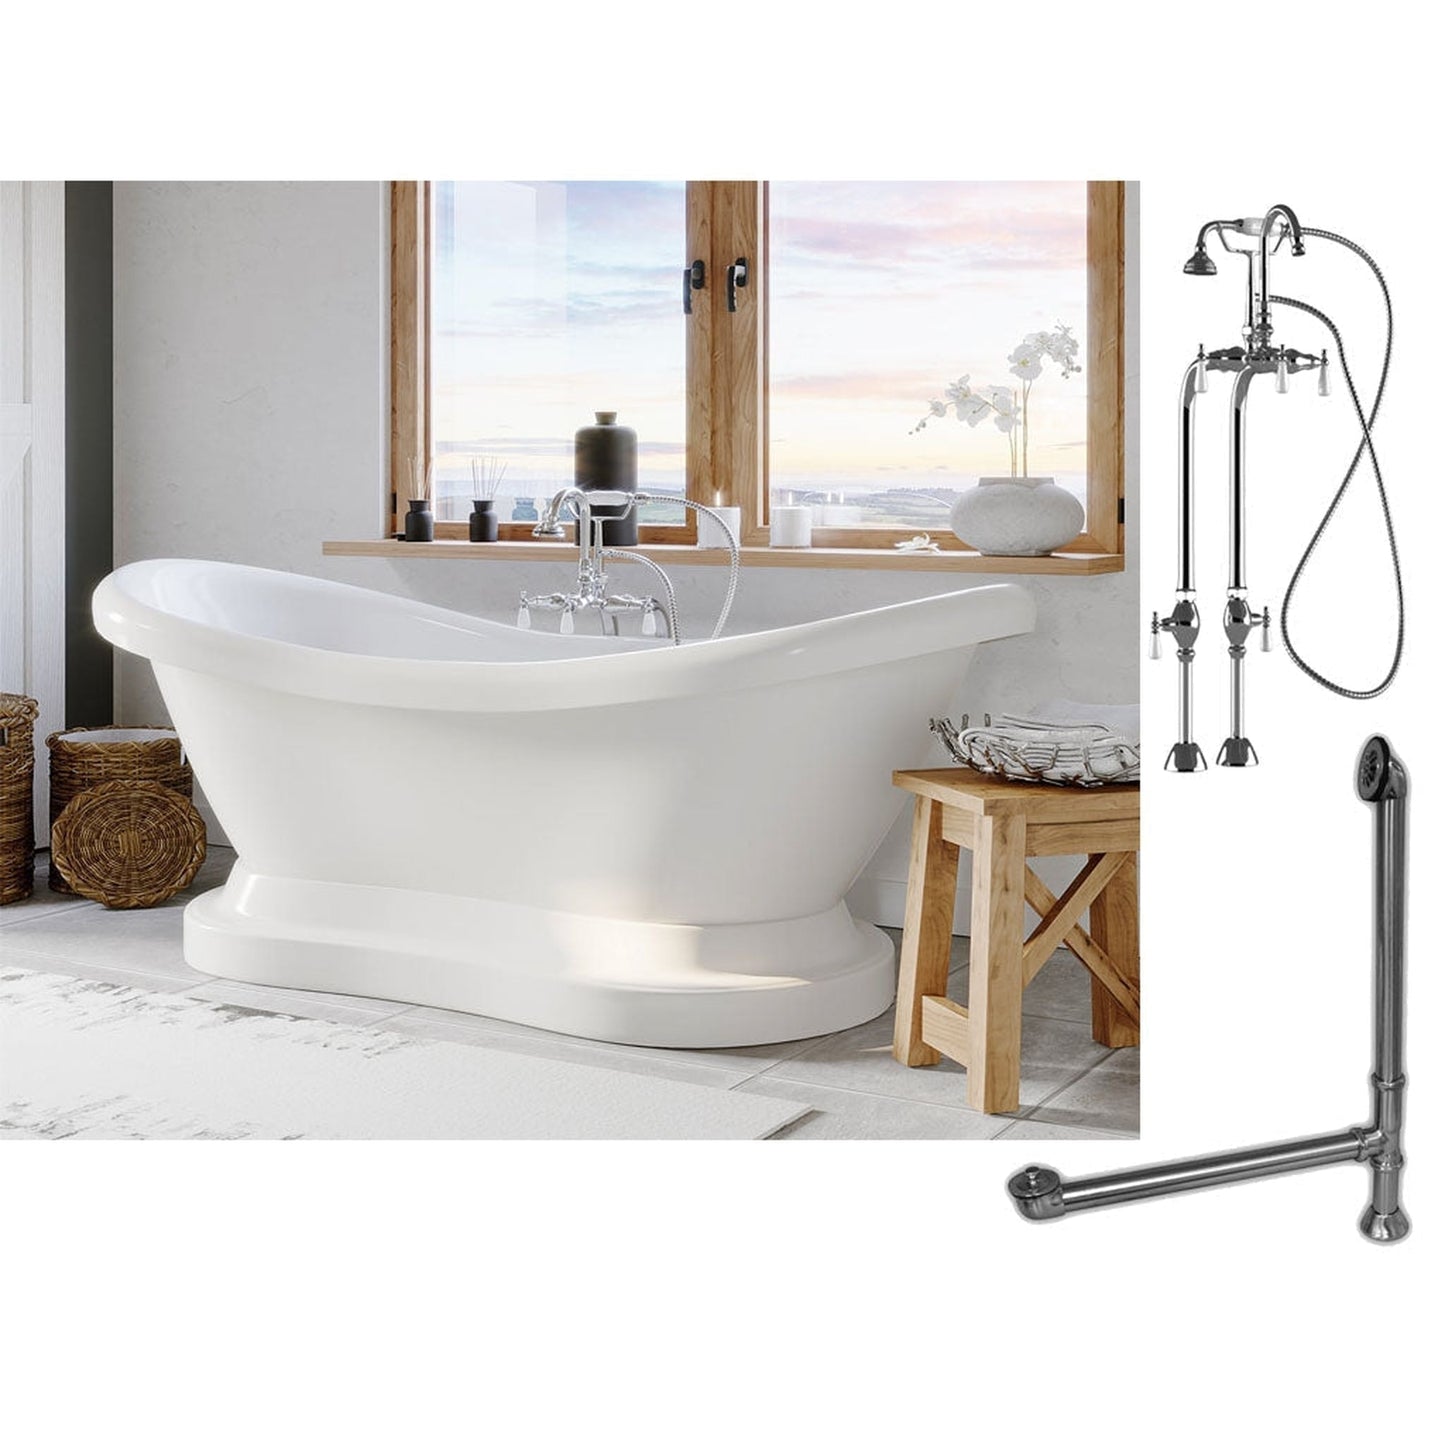 Cambridge Plumbing 69" White Double Slipper Pedestal Acrylic Bathtub With No Deck Holes And Complete Plumbing Package Including Freestanding English Telephone Gooseneck Faucet, Drain And Overflow Assembly In Polished Chrome